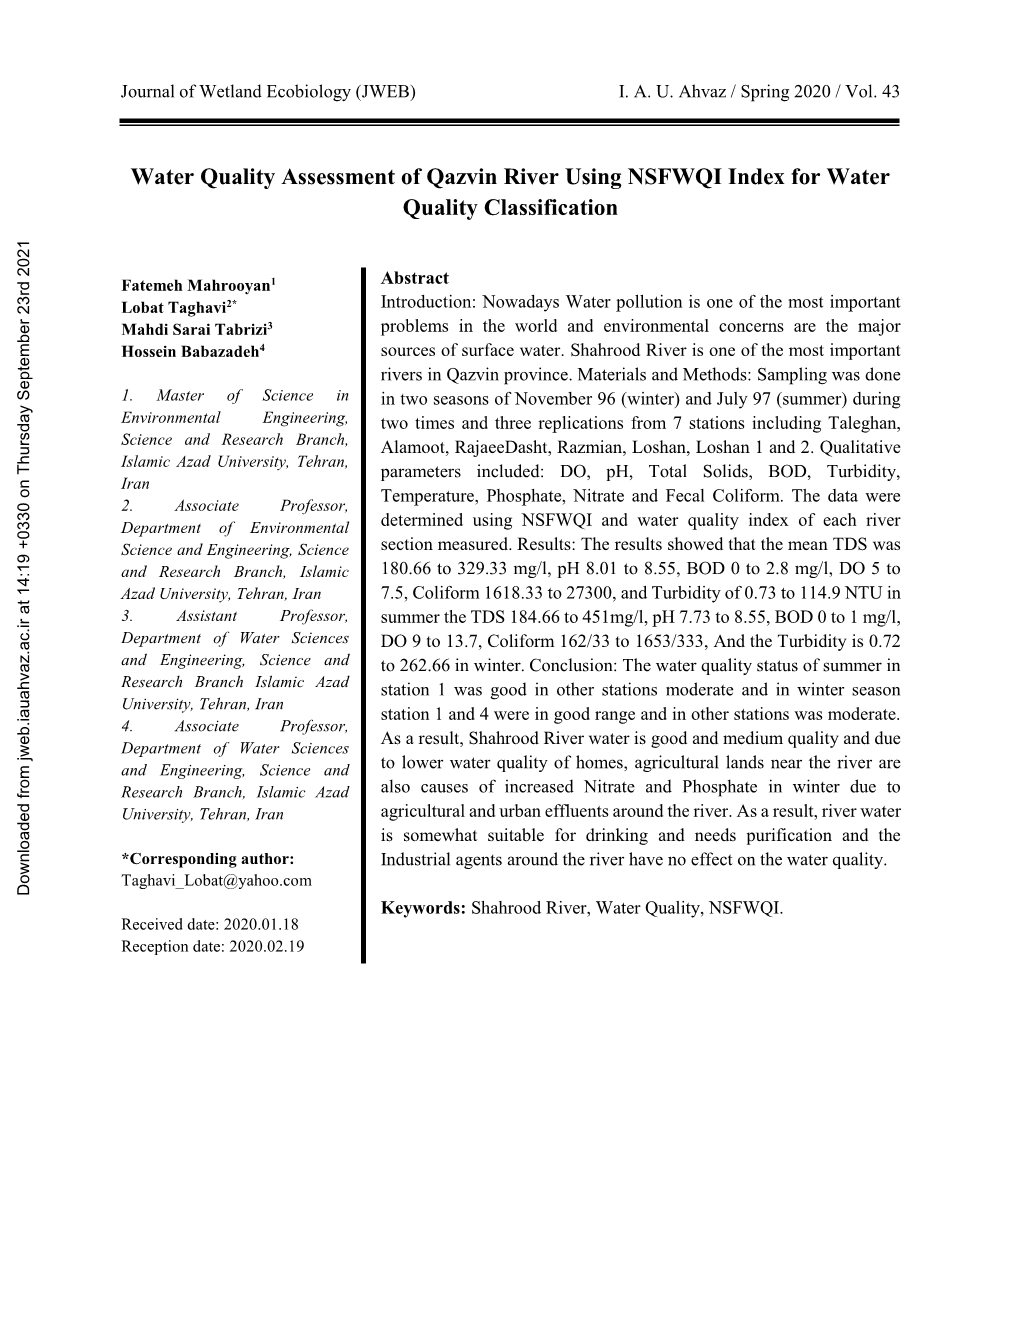 Water Quality Assessment of Qazvin River Using NSFWQI Index for Water Quality Classification